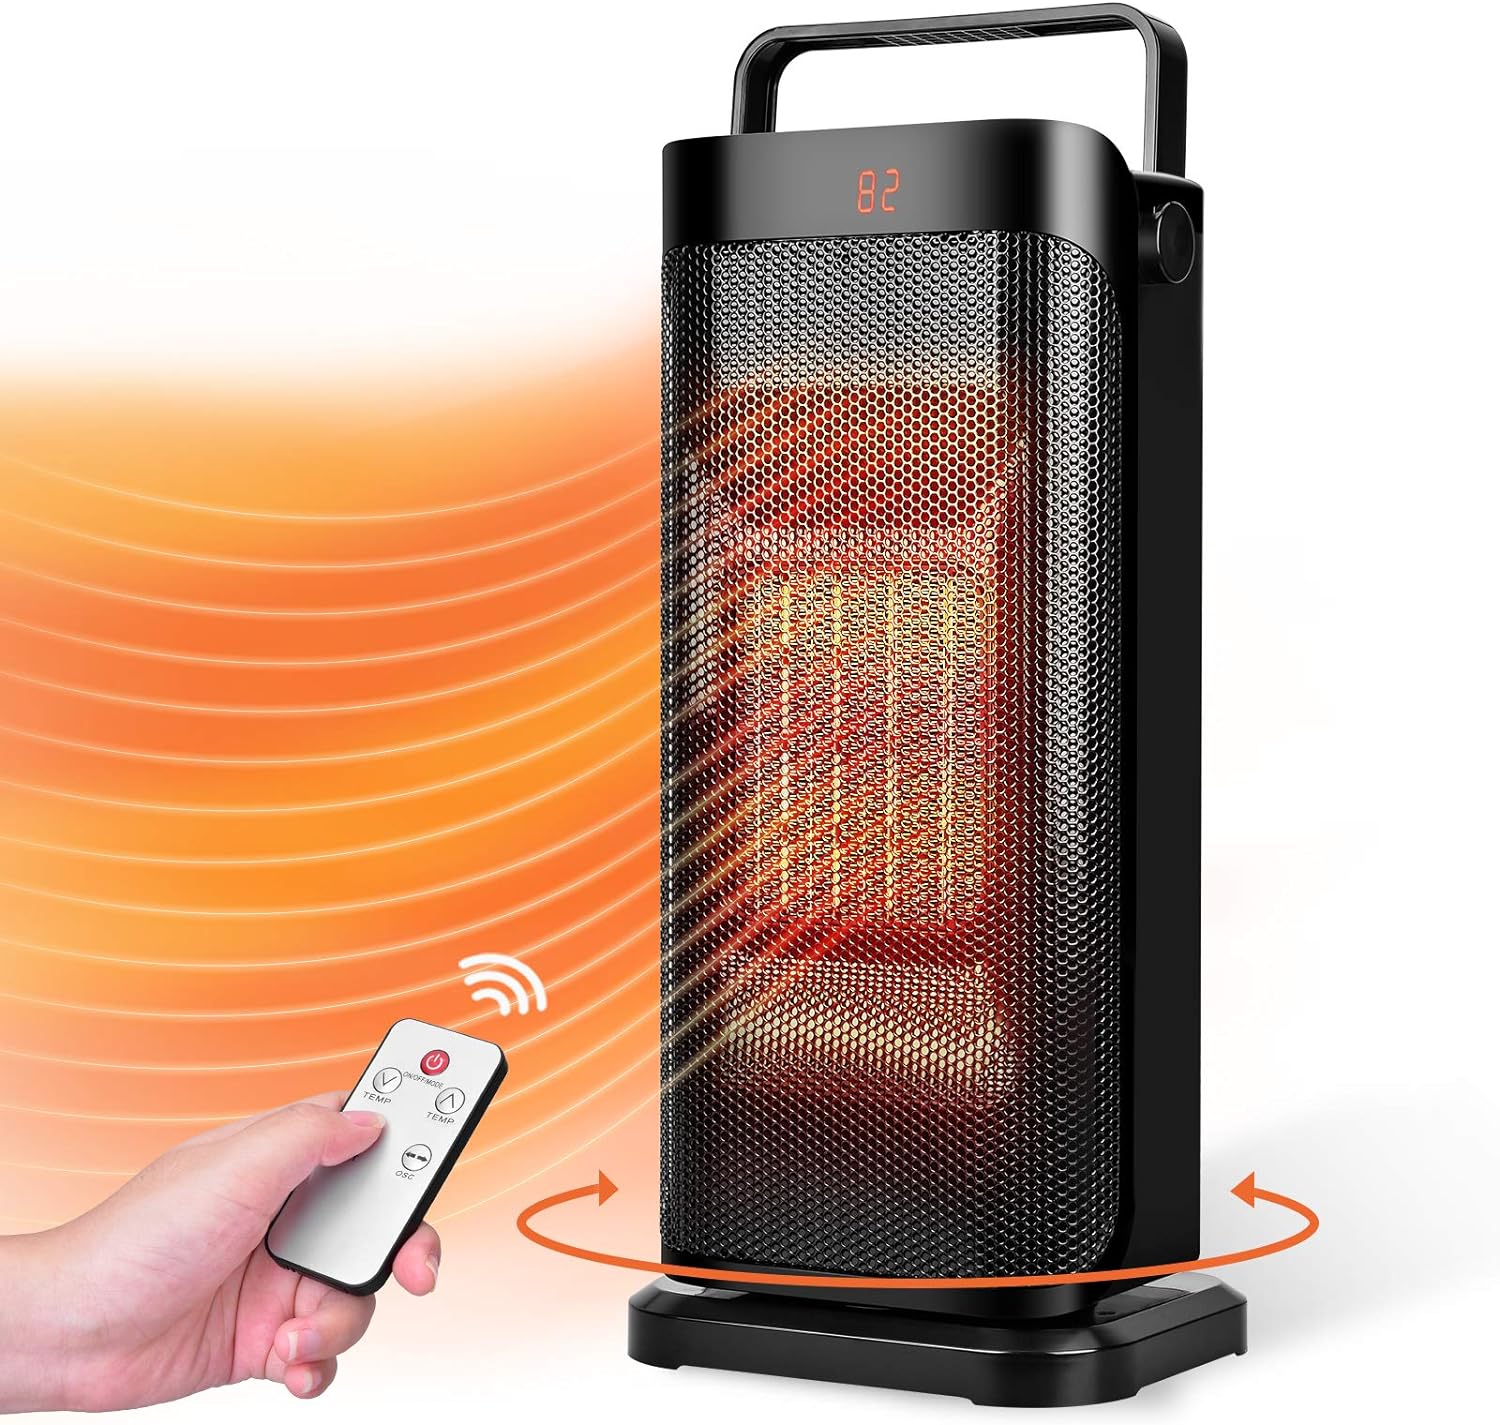 Electric Space Heater for Office - Portable Ceramic Space Heater w/Remote, 120°Oscillating, thermostat, 3 Modes, 12H Timer, Quiet Room Heater for Bedroom, Garage, Office, Home Indoor use